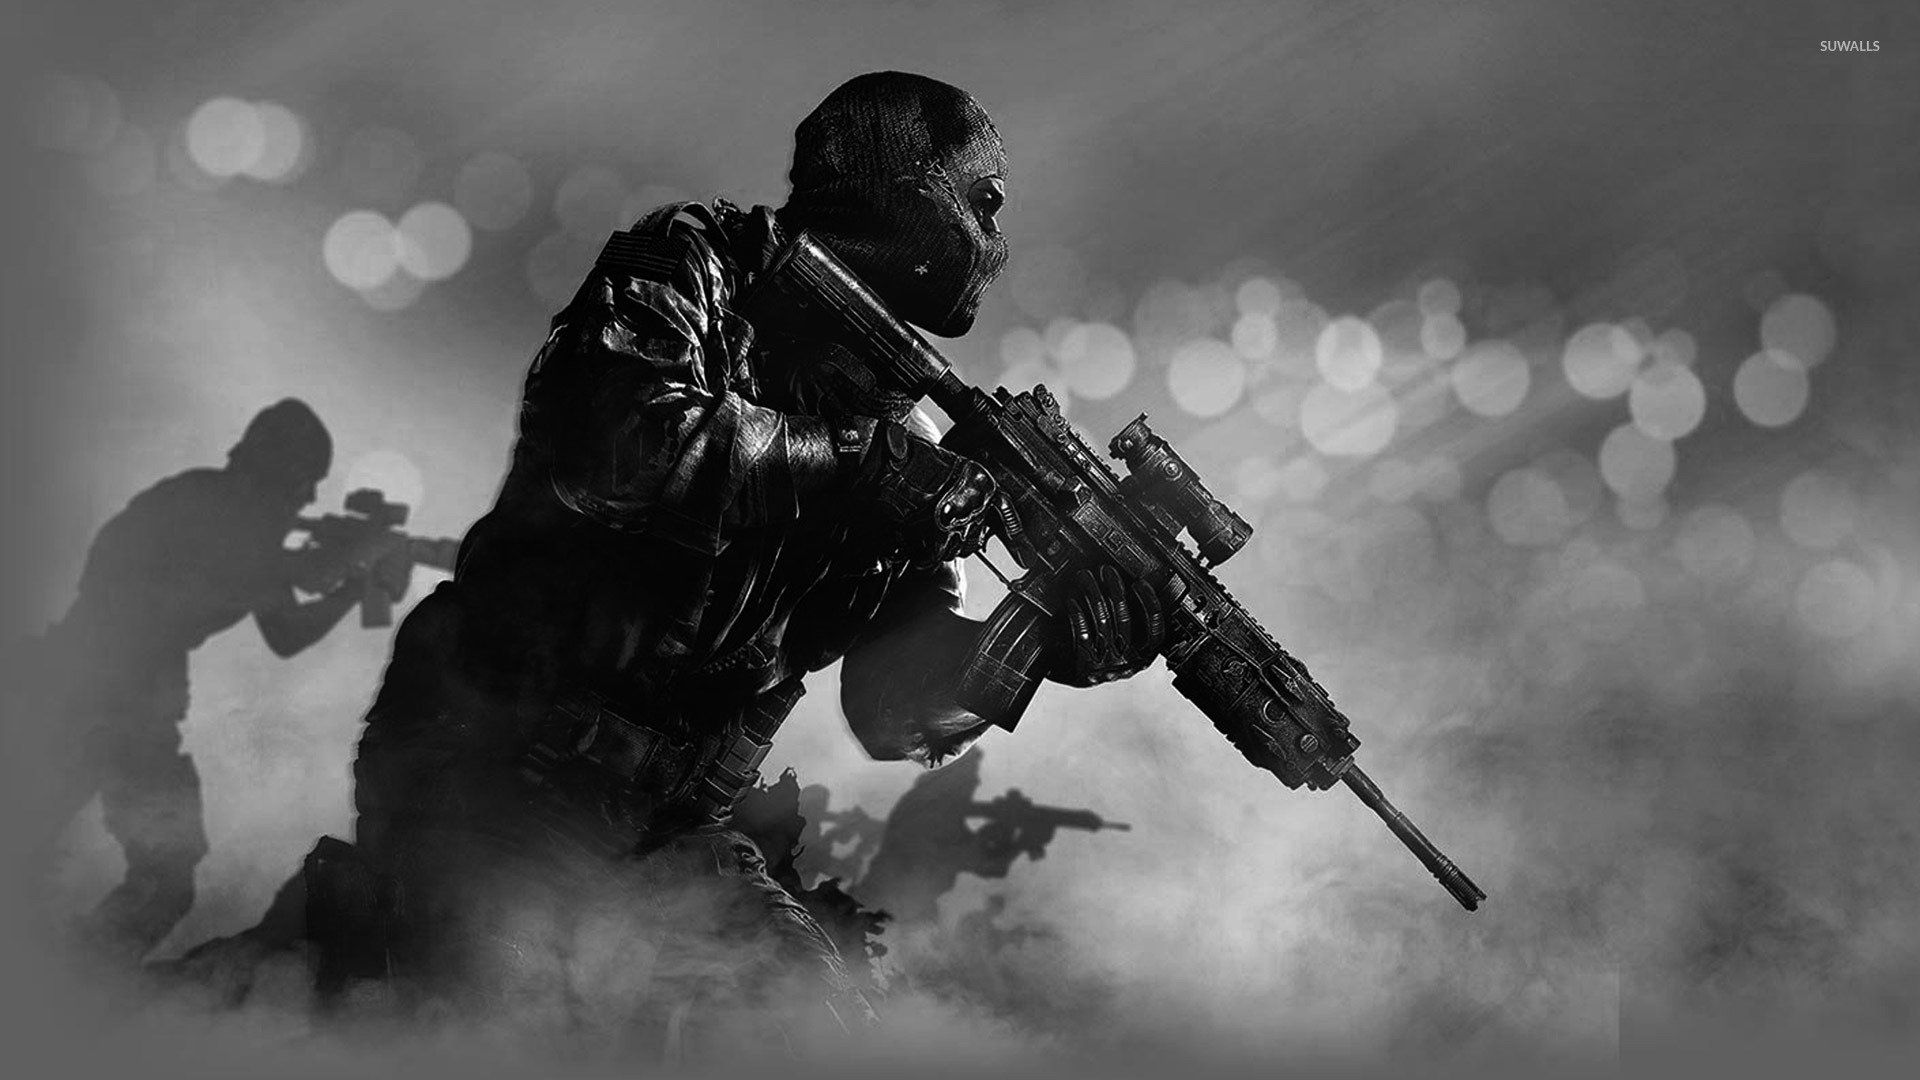 Free download Call of Duty Ghosts [19] wallpaper Game wallpaper 29822 [1920x1080] for your Desktop, Mobile & Tablet. Explore Mw2 Ghost Wallpaper. Mw2 Wallpaper, Ghost Wallpaper, Cod Wallpaper for Desktop